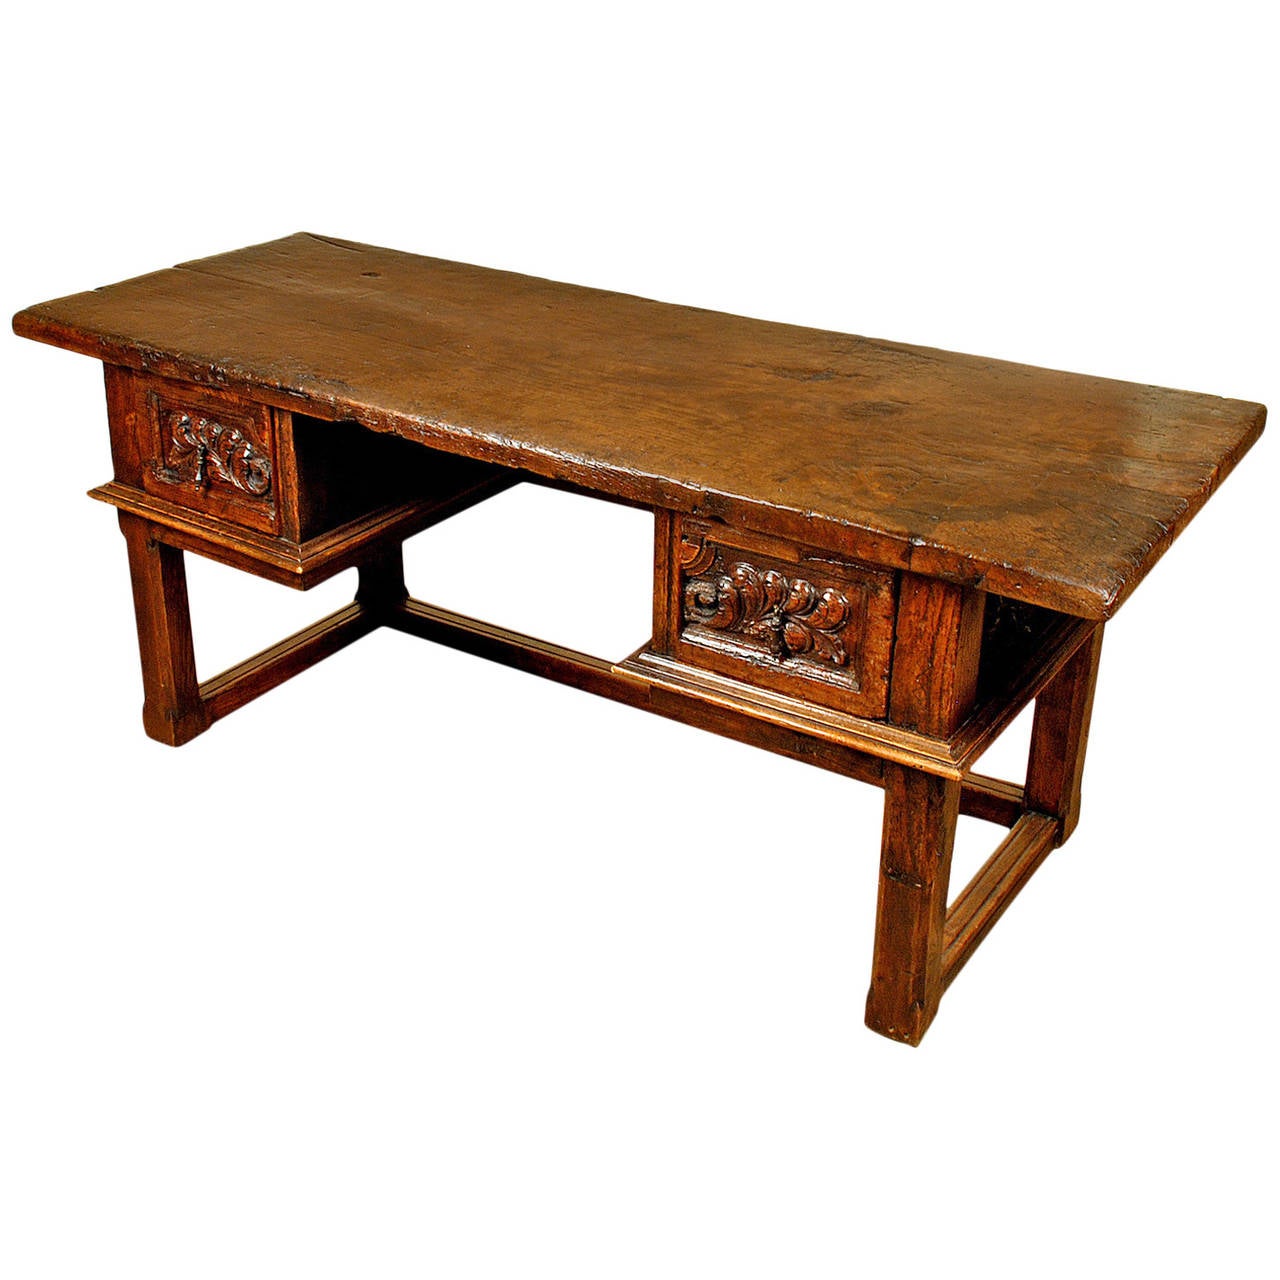 Late 17th Century Spanish Baroque Period Chestnut Kneehole Desk For Sale